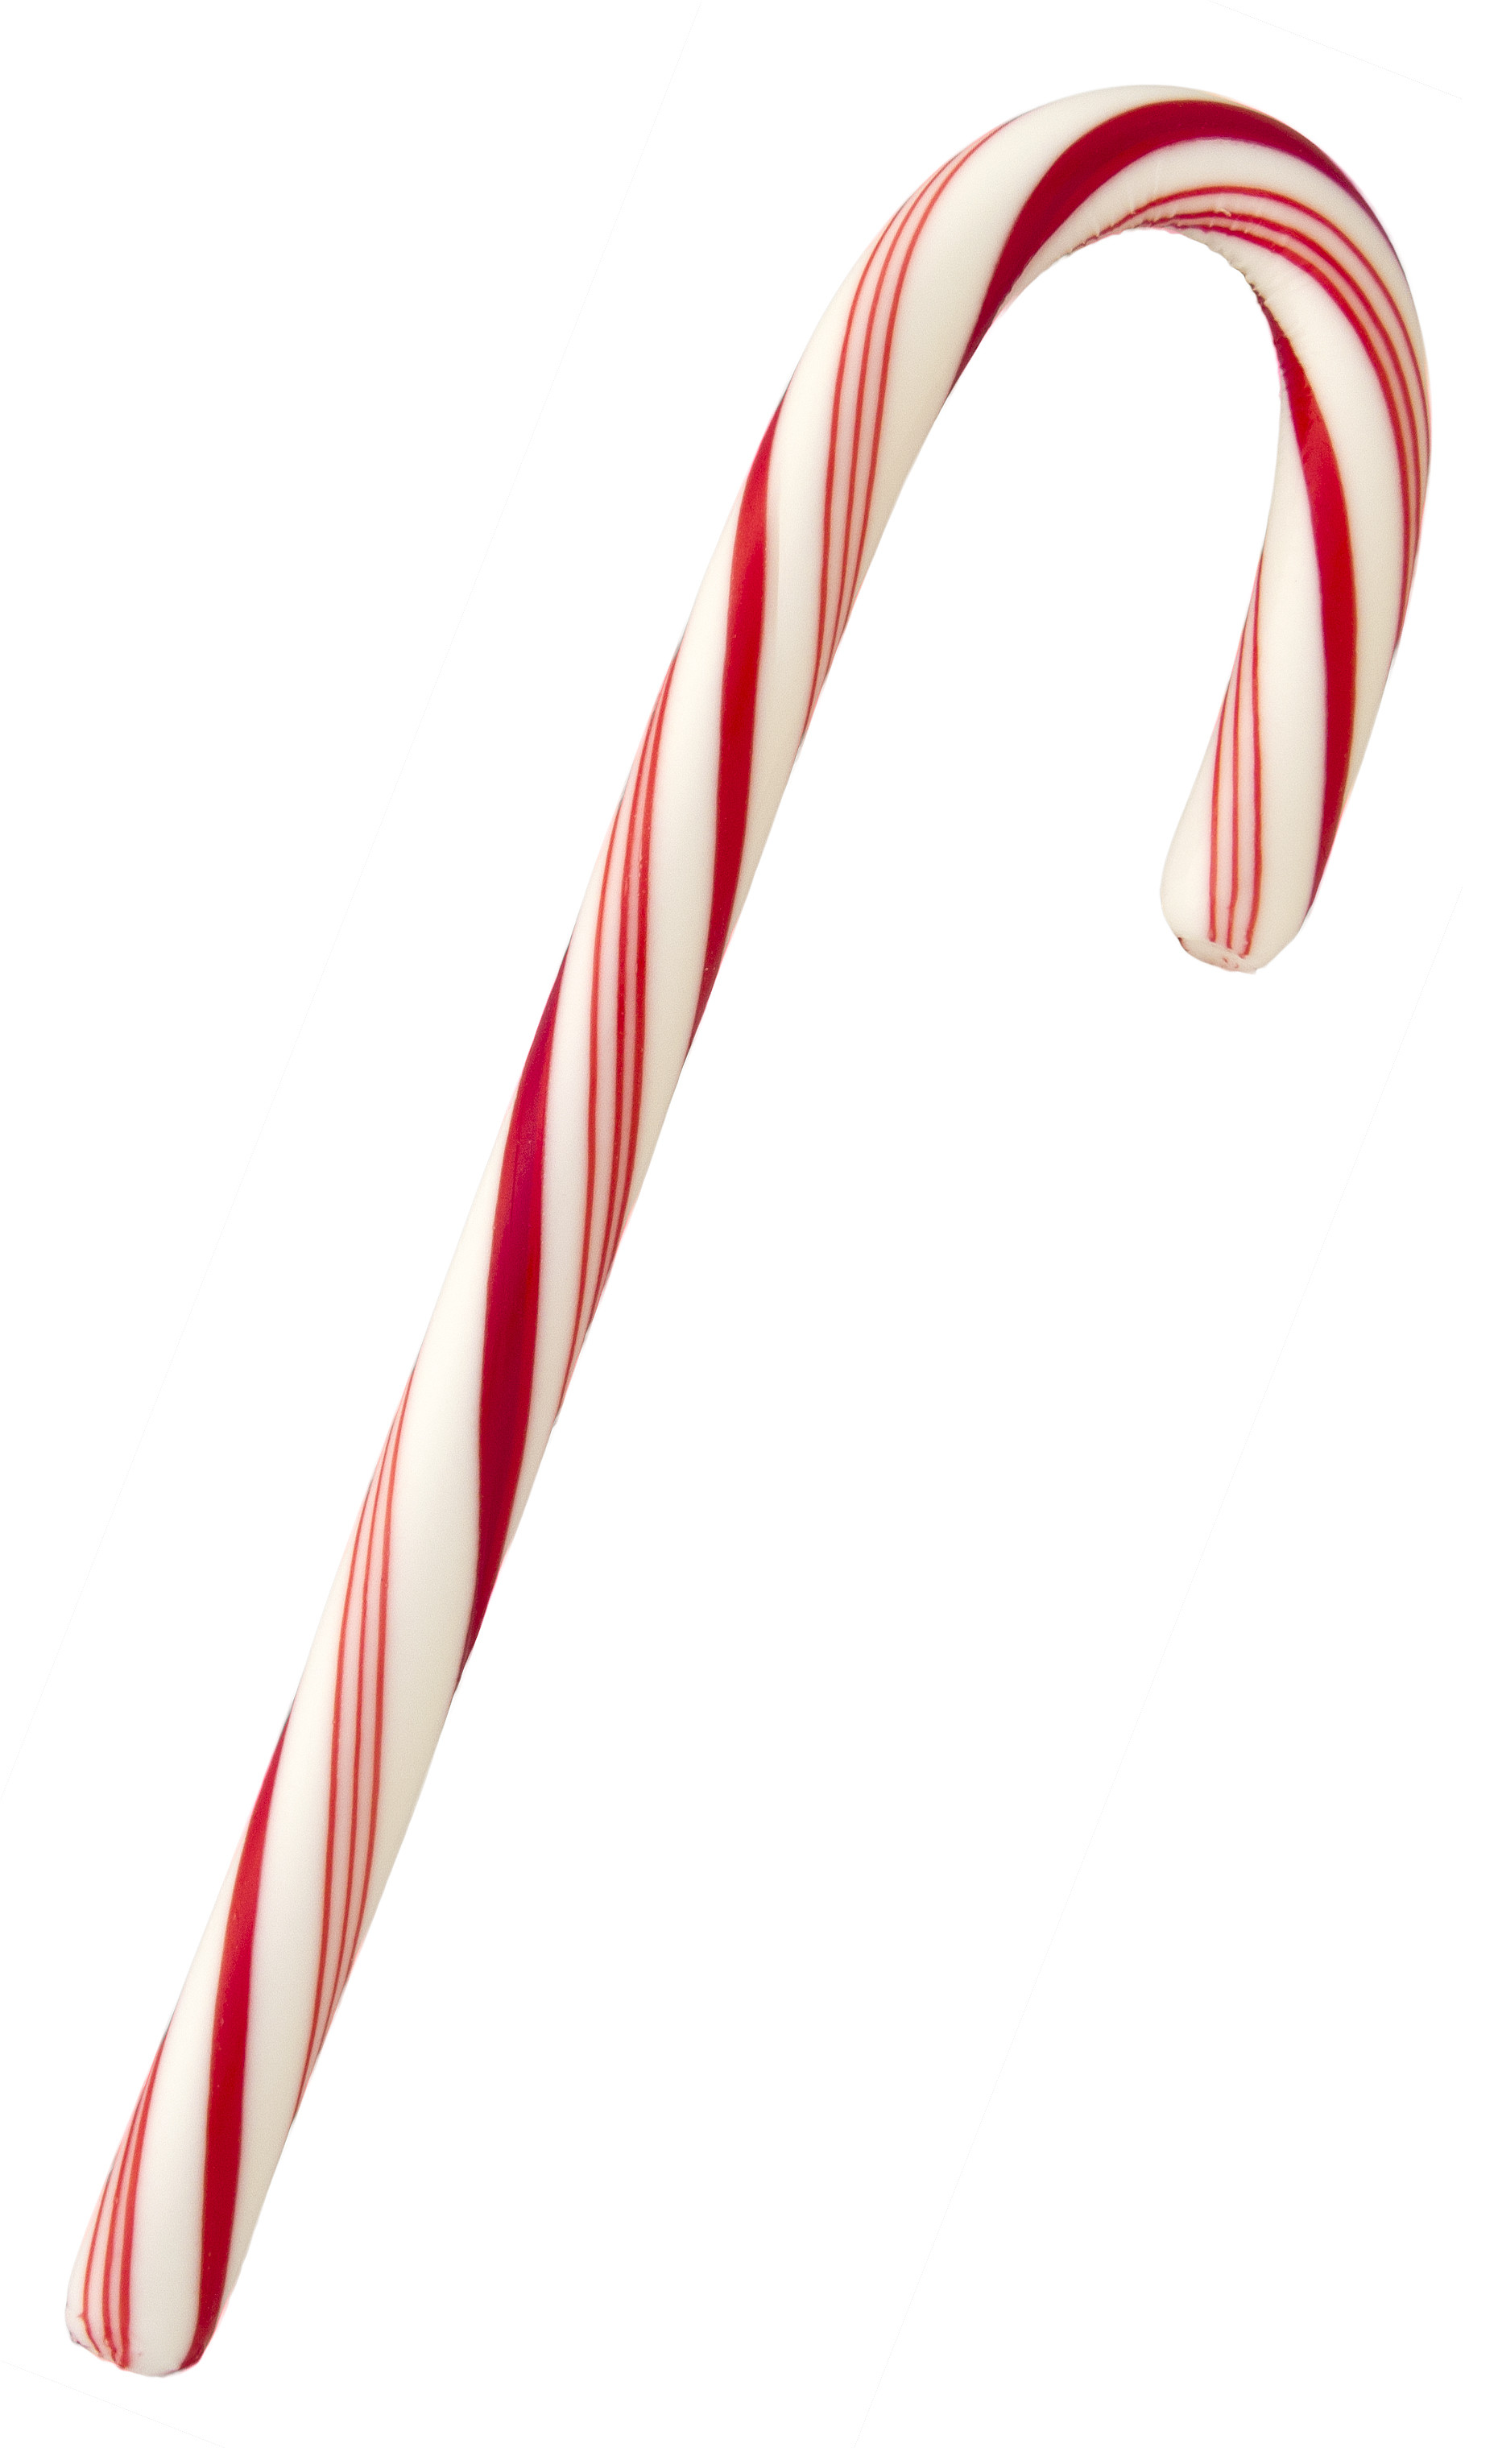 Christmas Candy Cane
 File Candy Cane Classic Wikimedia mons